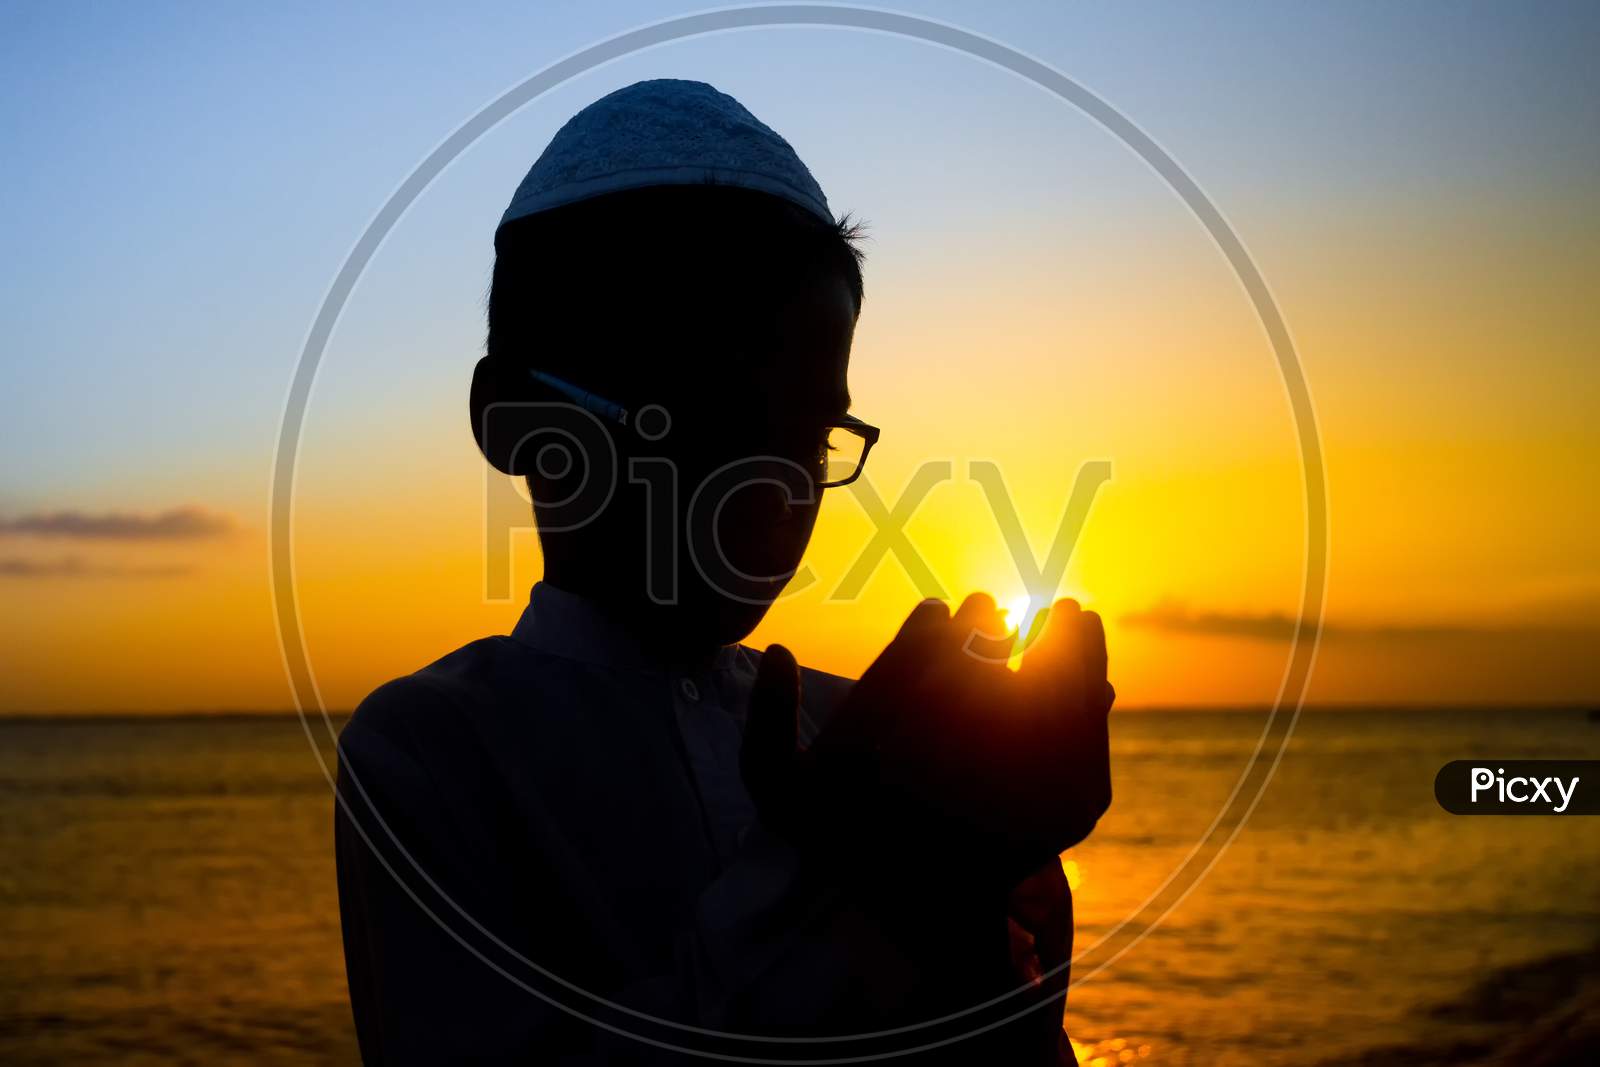 Bangladesh – June 22, 2019: A Muslim Boy Is Praying By The Riverside At Sunset In The Evening Time At Chandpur, Bangladesh.